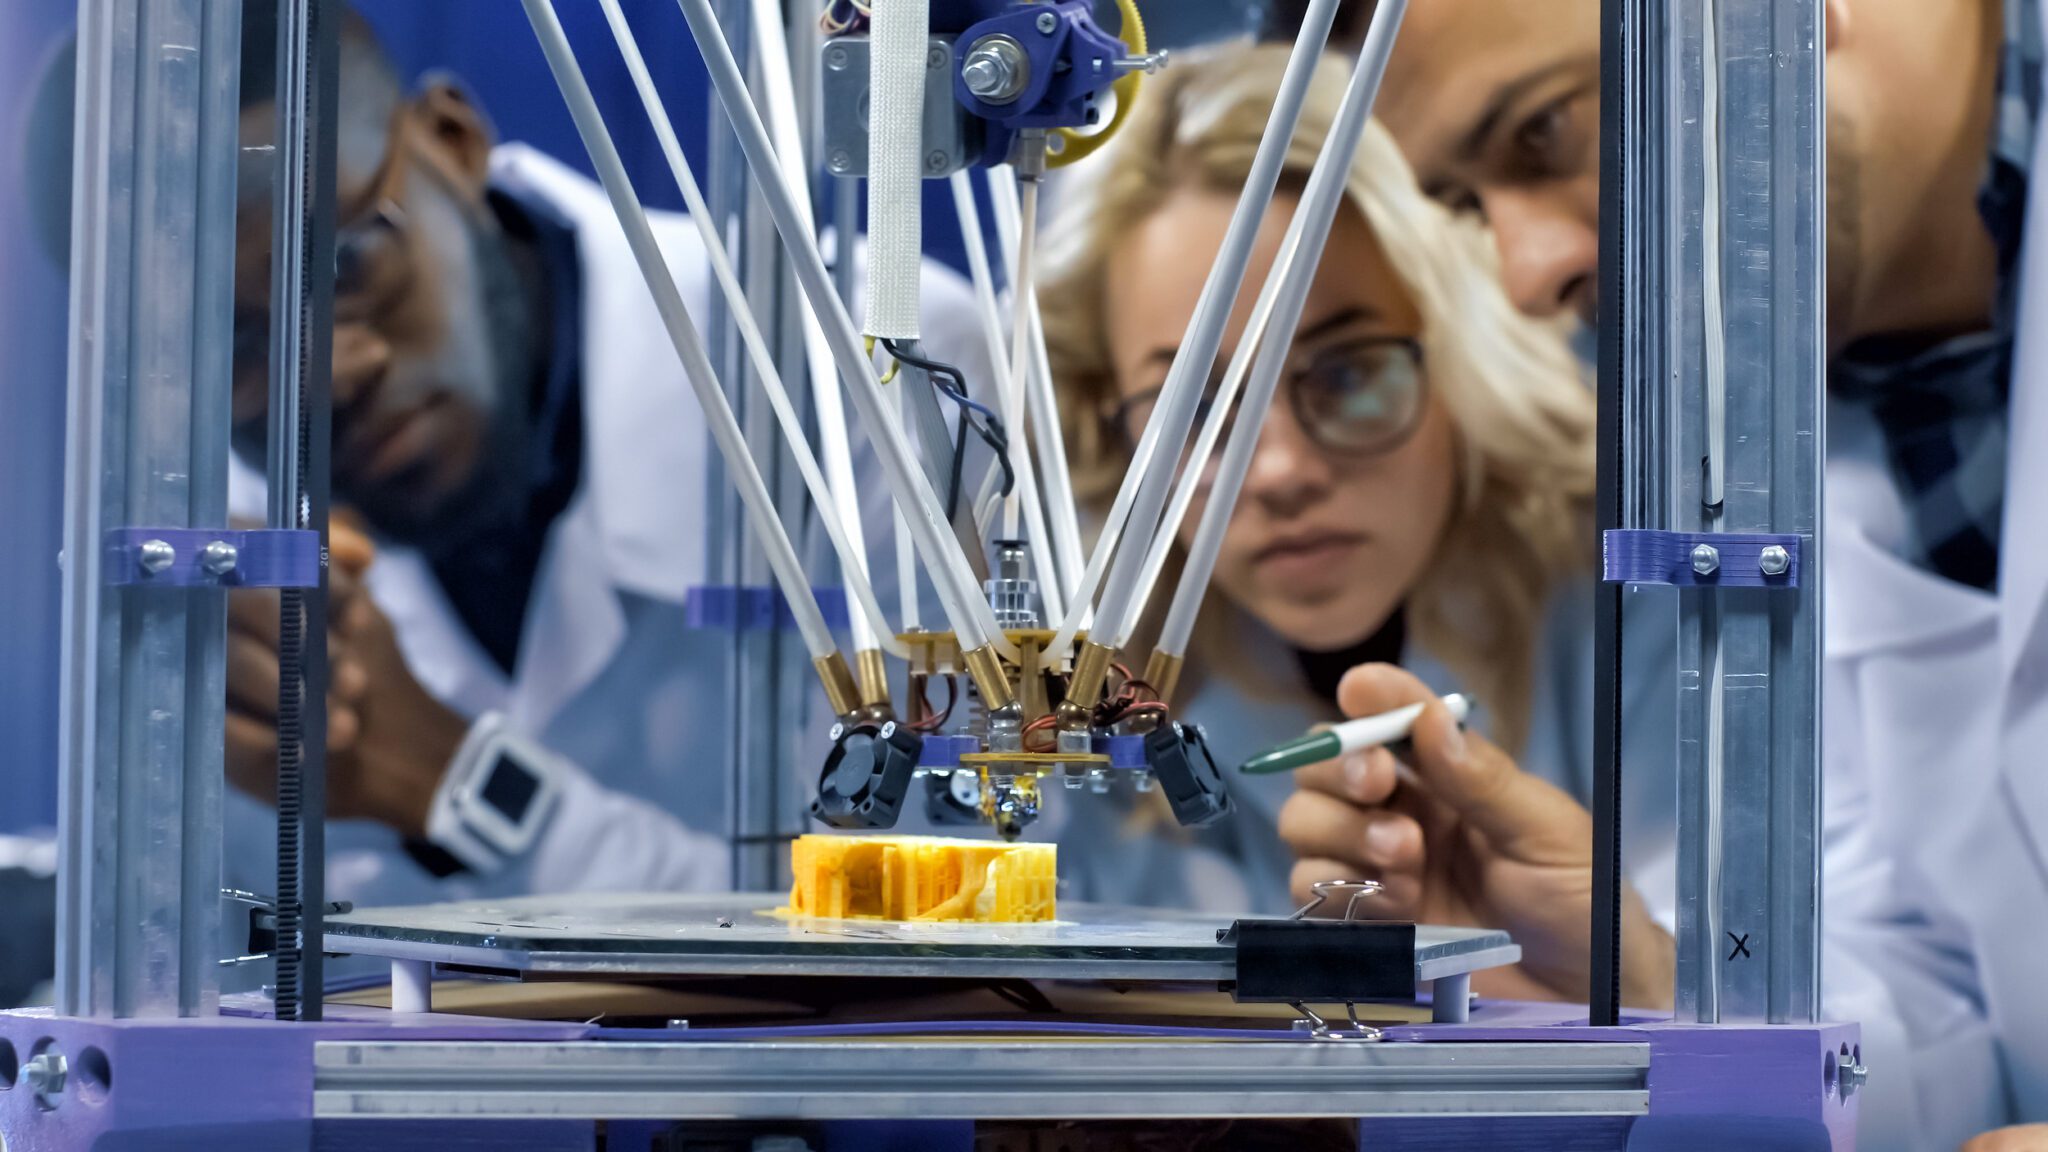 Researchers watching 3-D printing machine in process